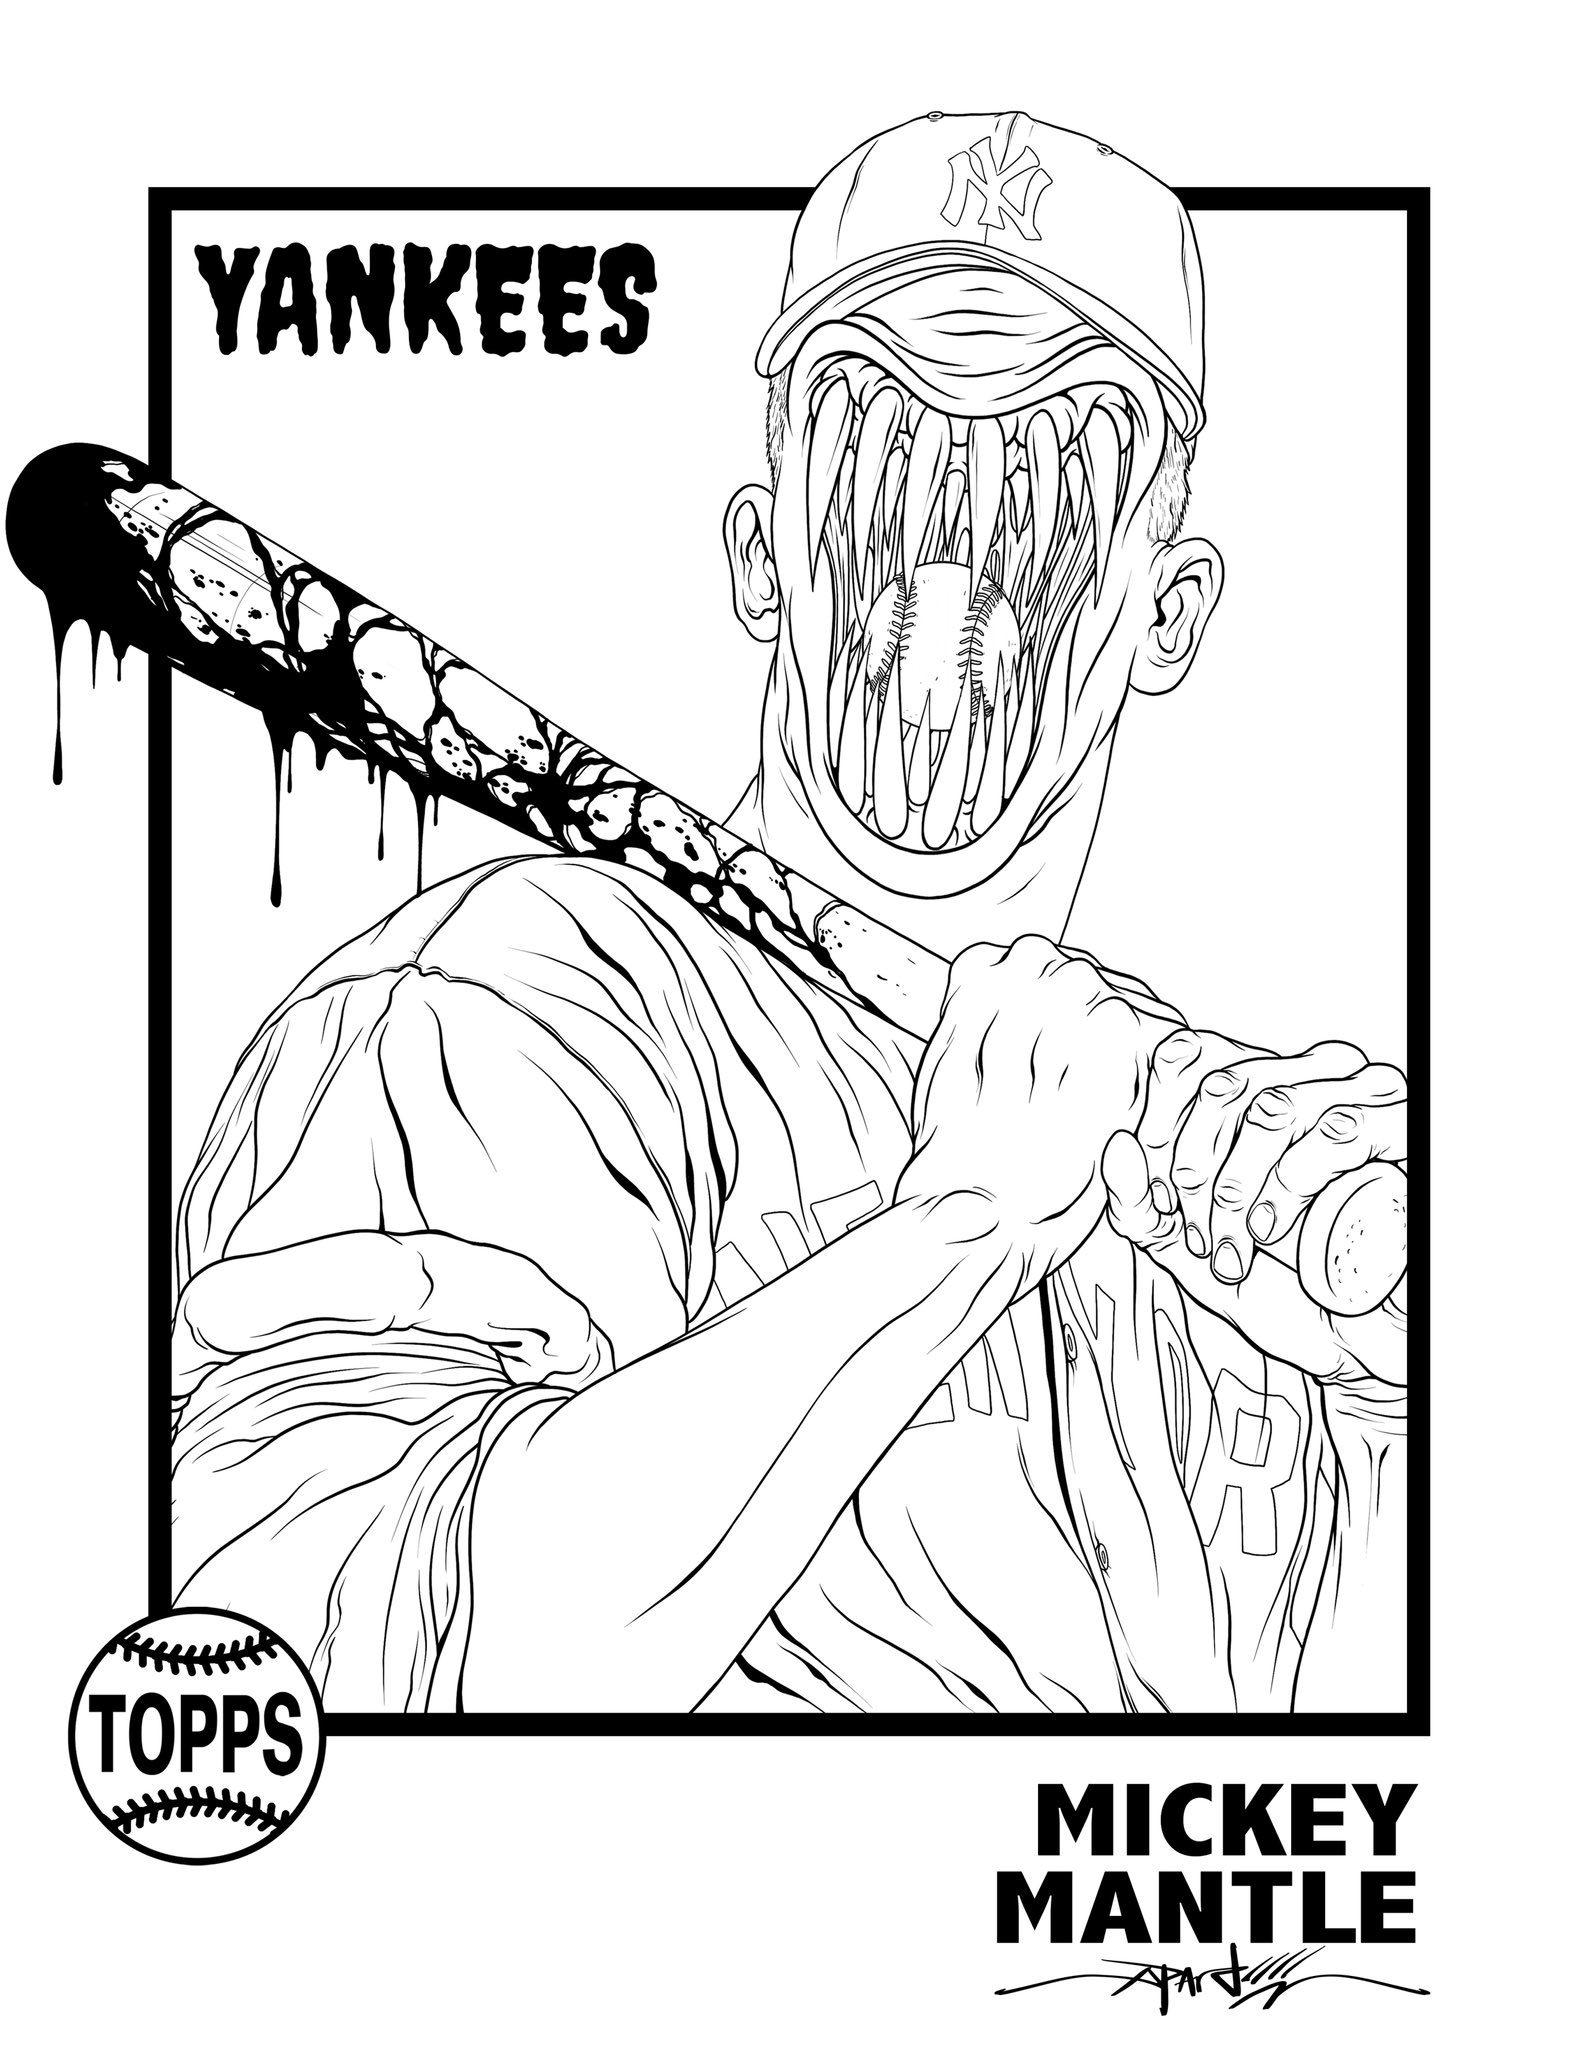 Alex Pardee on X: My entire collection of @Topps cards as free  downloadable coloring pages is now complete, with the final two legends.  Mickey Mantle and Honus Wagner. Enjoy! 👍  /